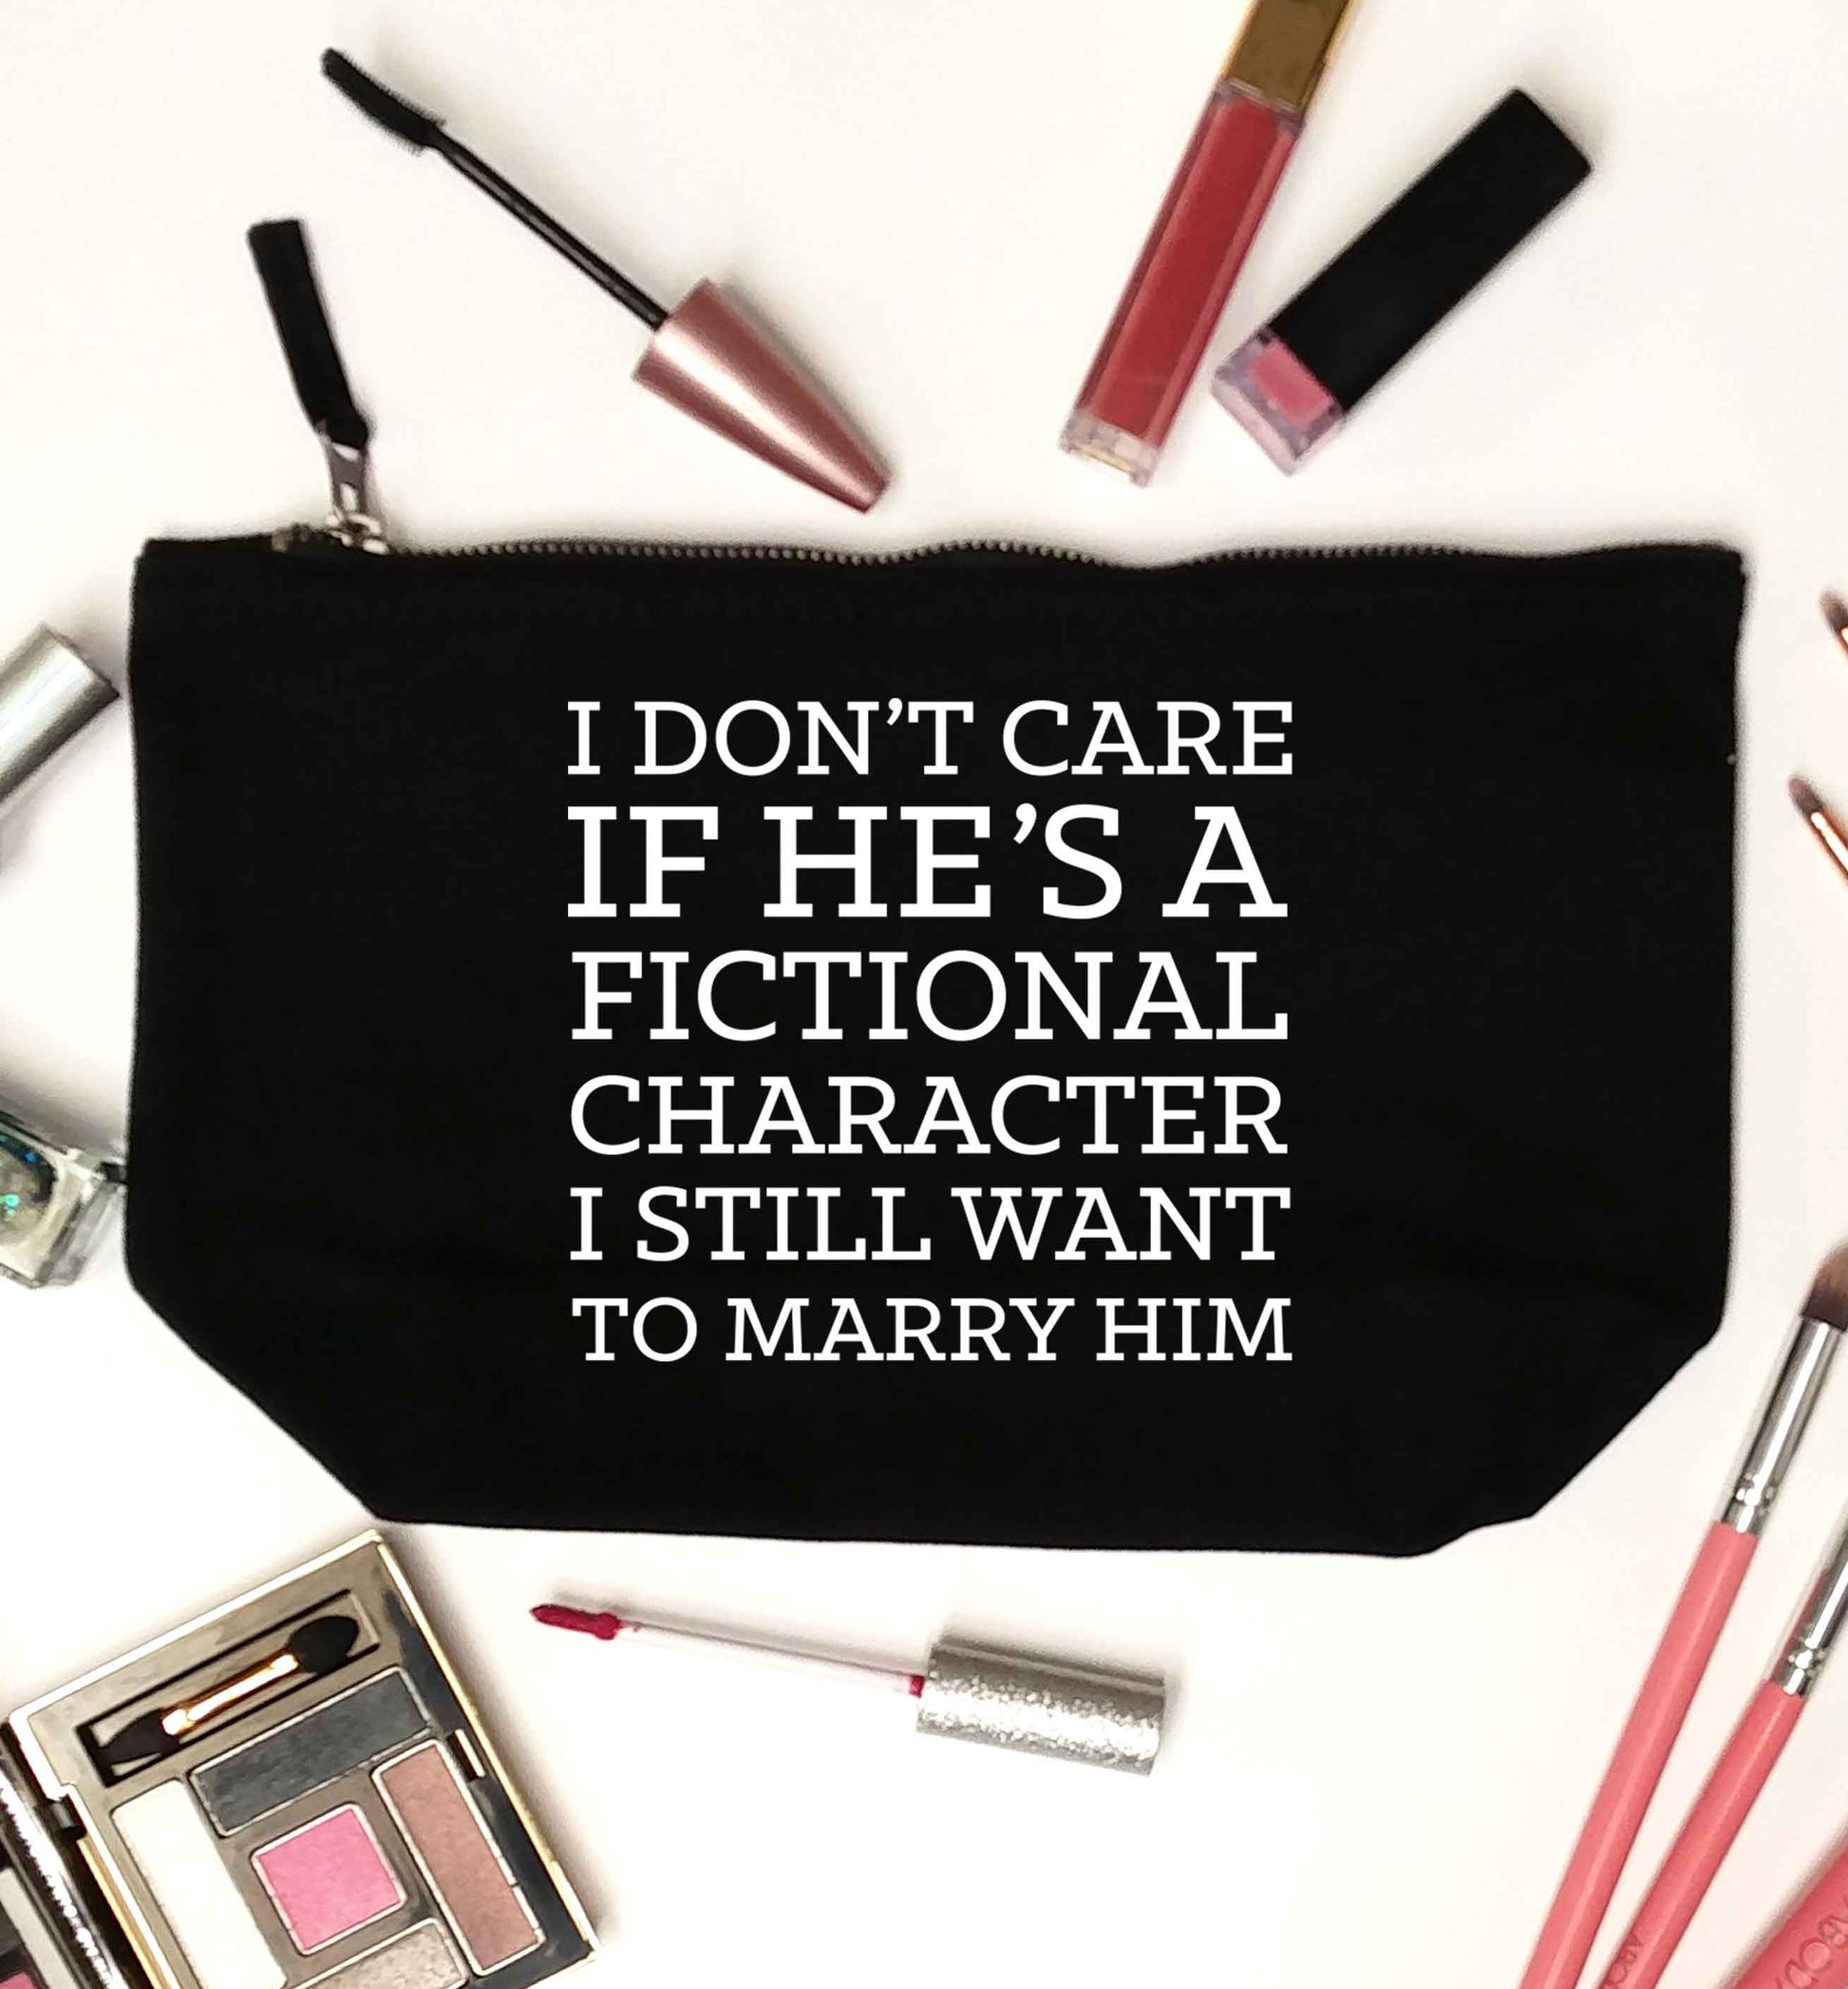 I don't care if he's a fictional character I still want to marry him black makeup bag